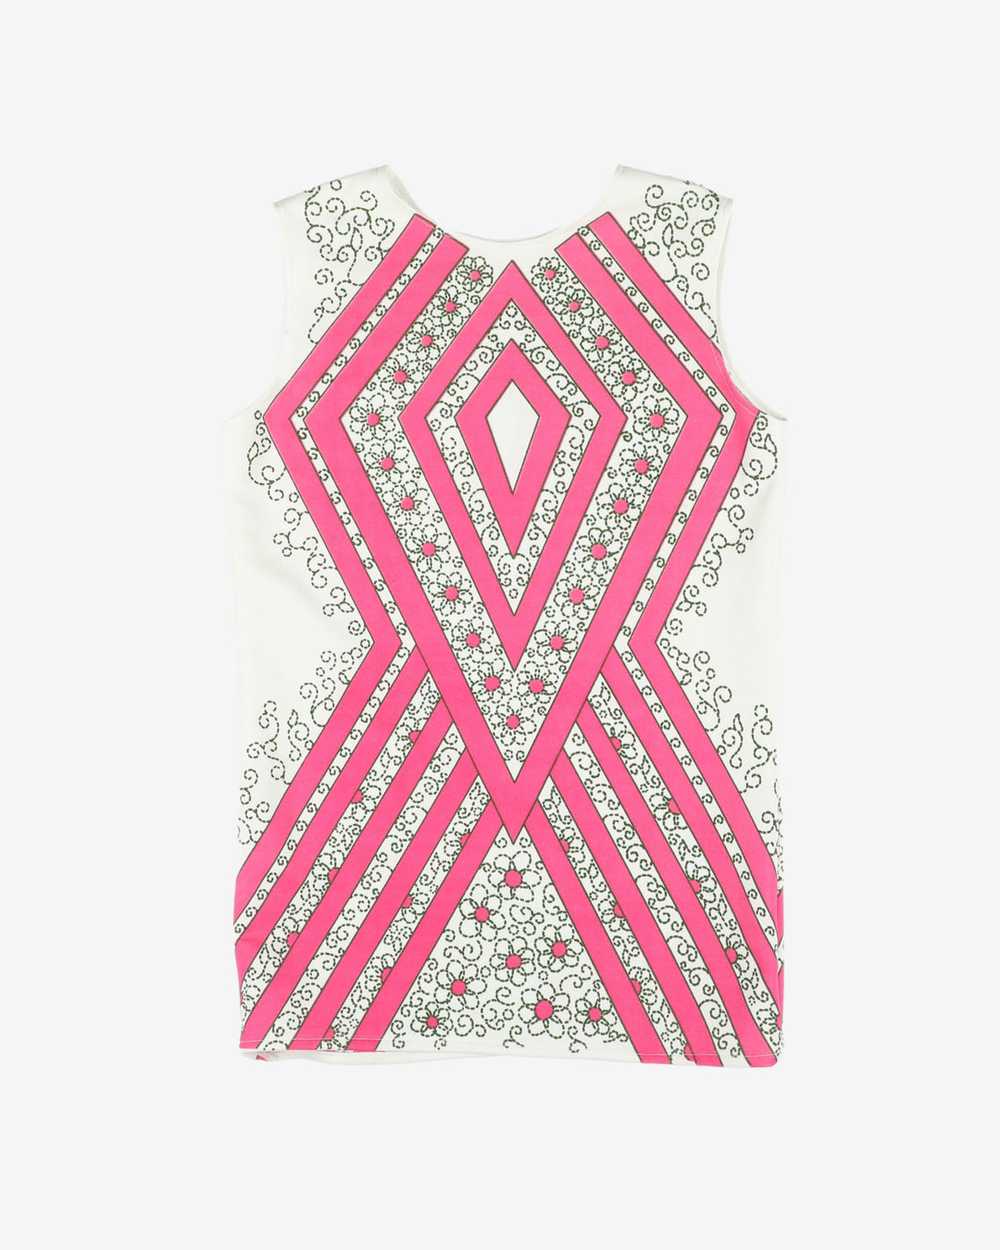 1970s pink graphic print sleeveless top - S - image 2